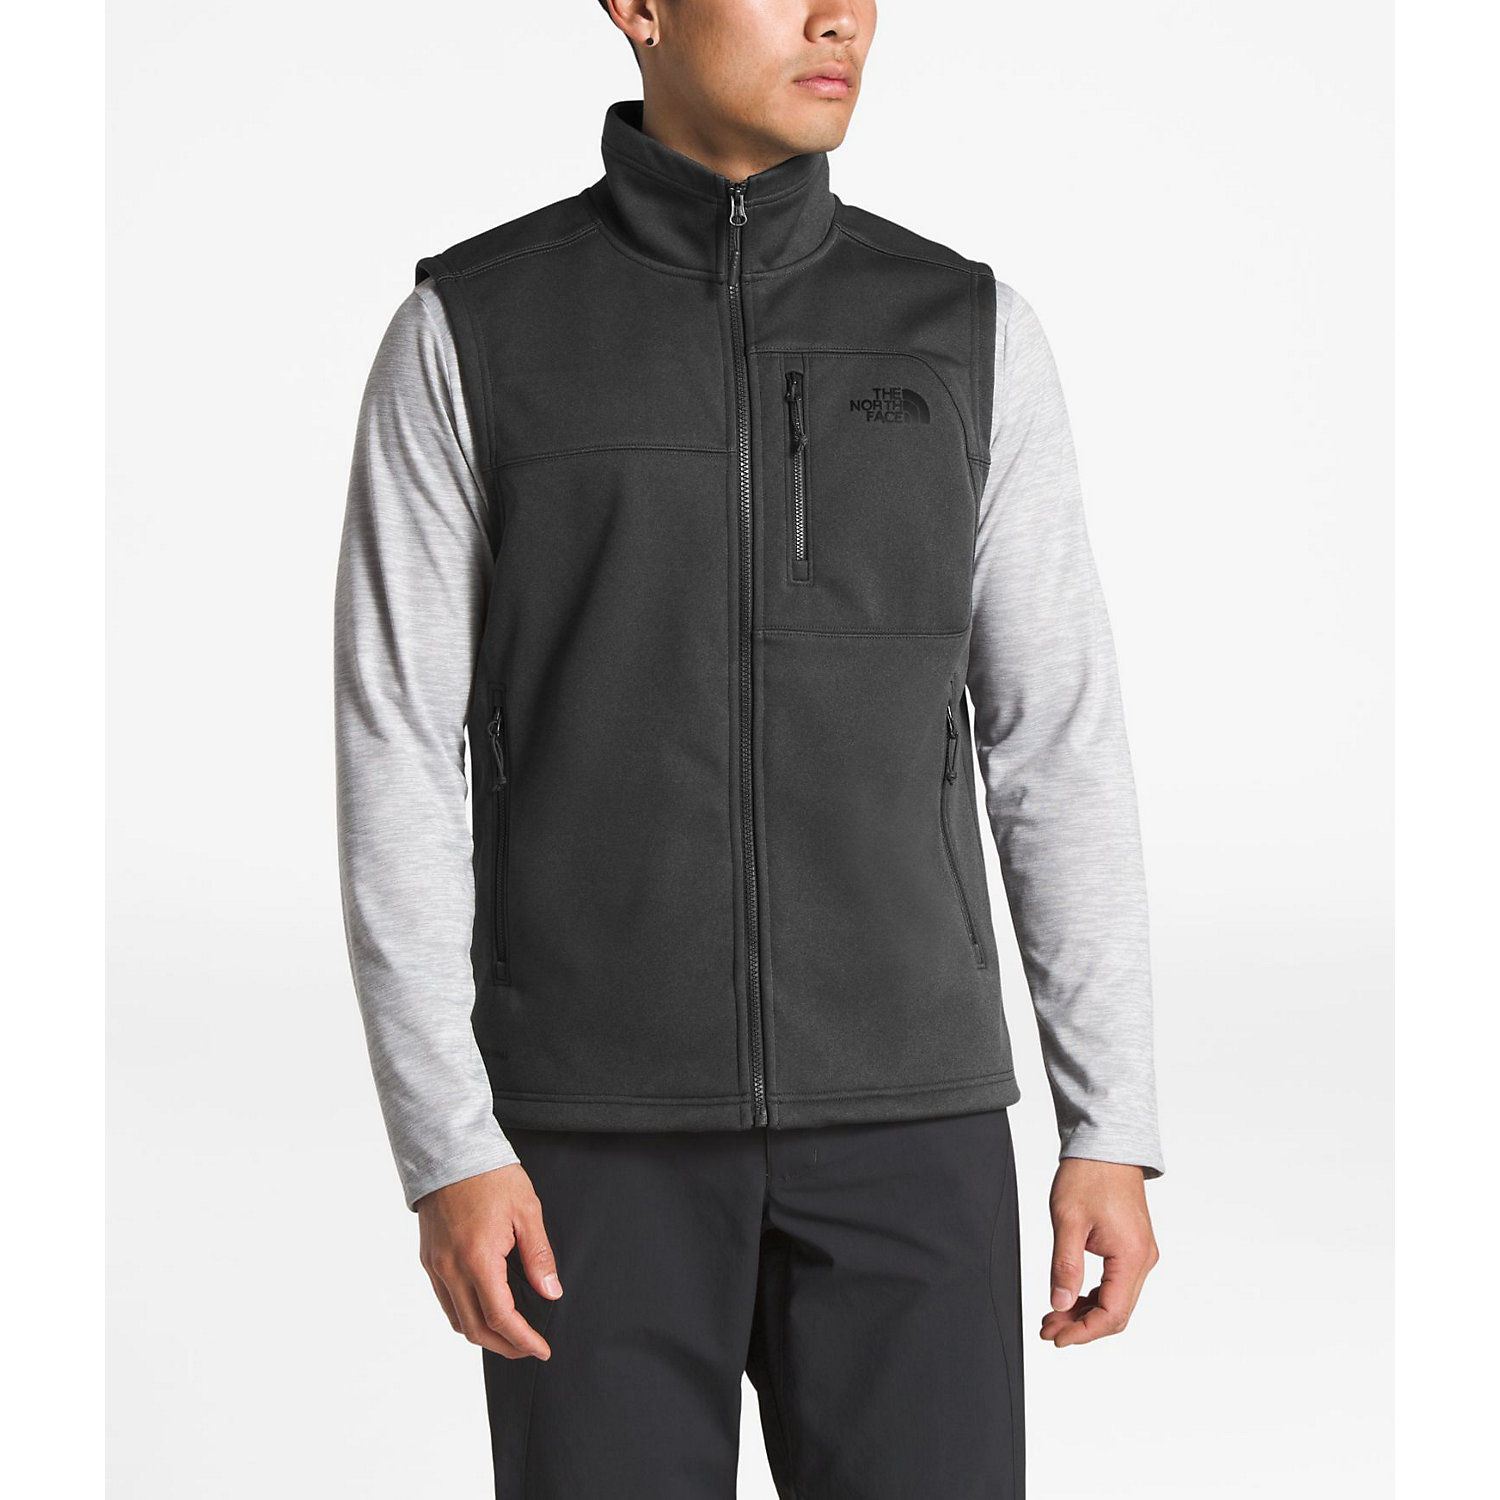 lucht Anesthesie Zorg The North Face Men's Apex Risor Vest - Moosejaw